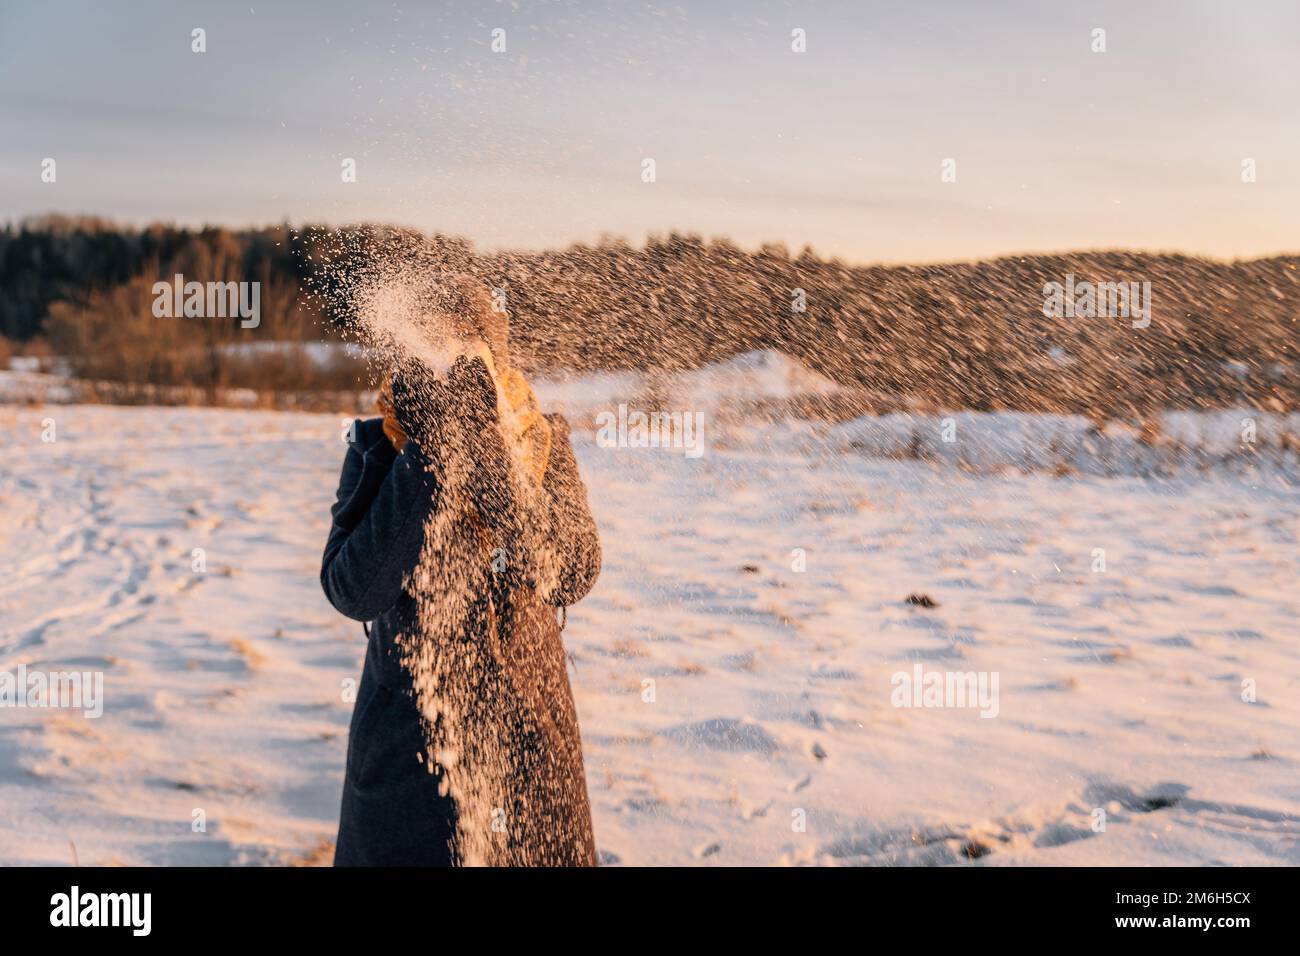 An unidentified woman throws snow in a snow-covered field. Stock Photo